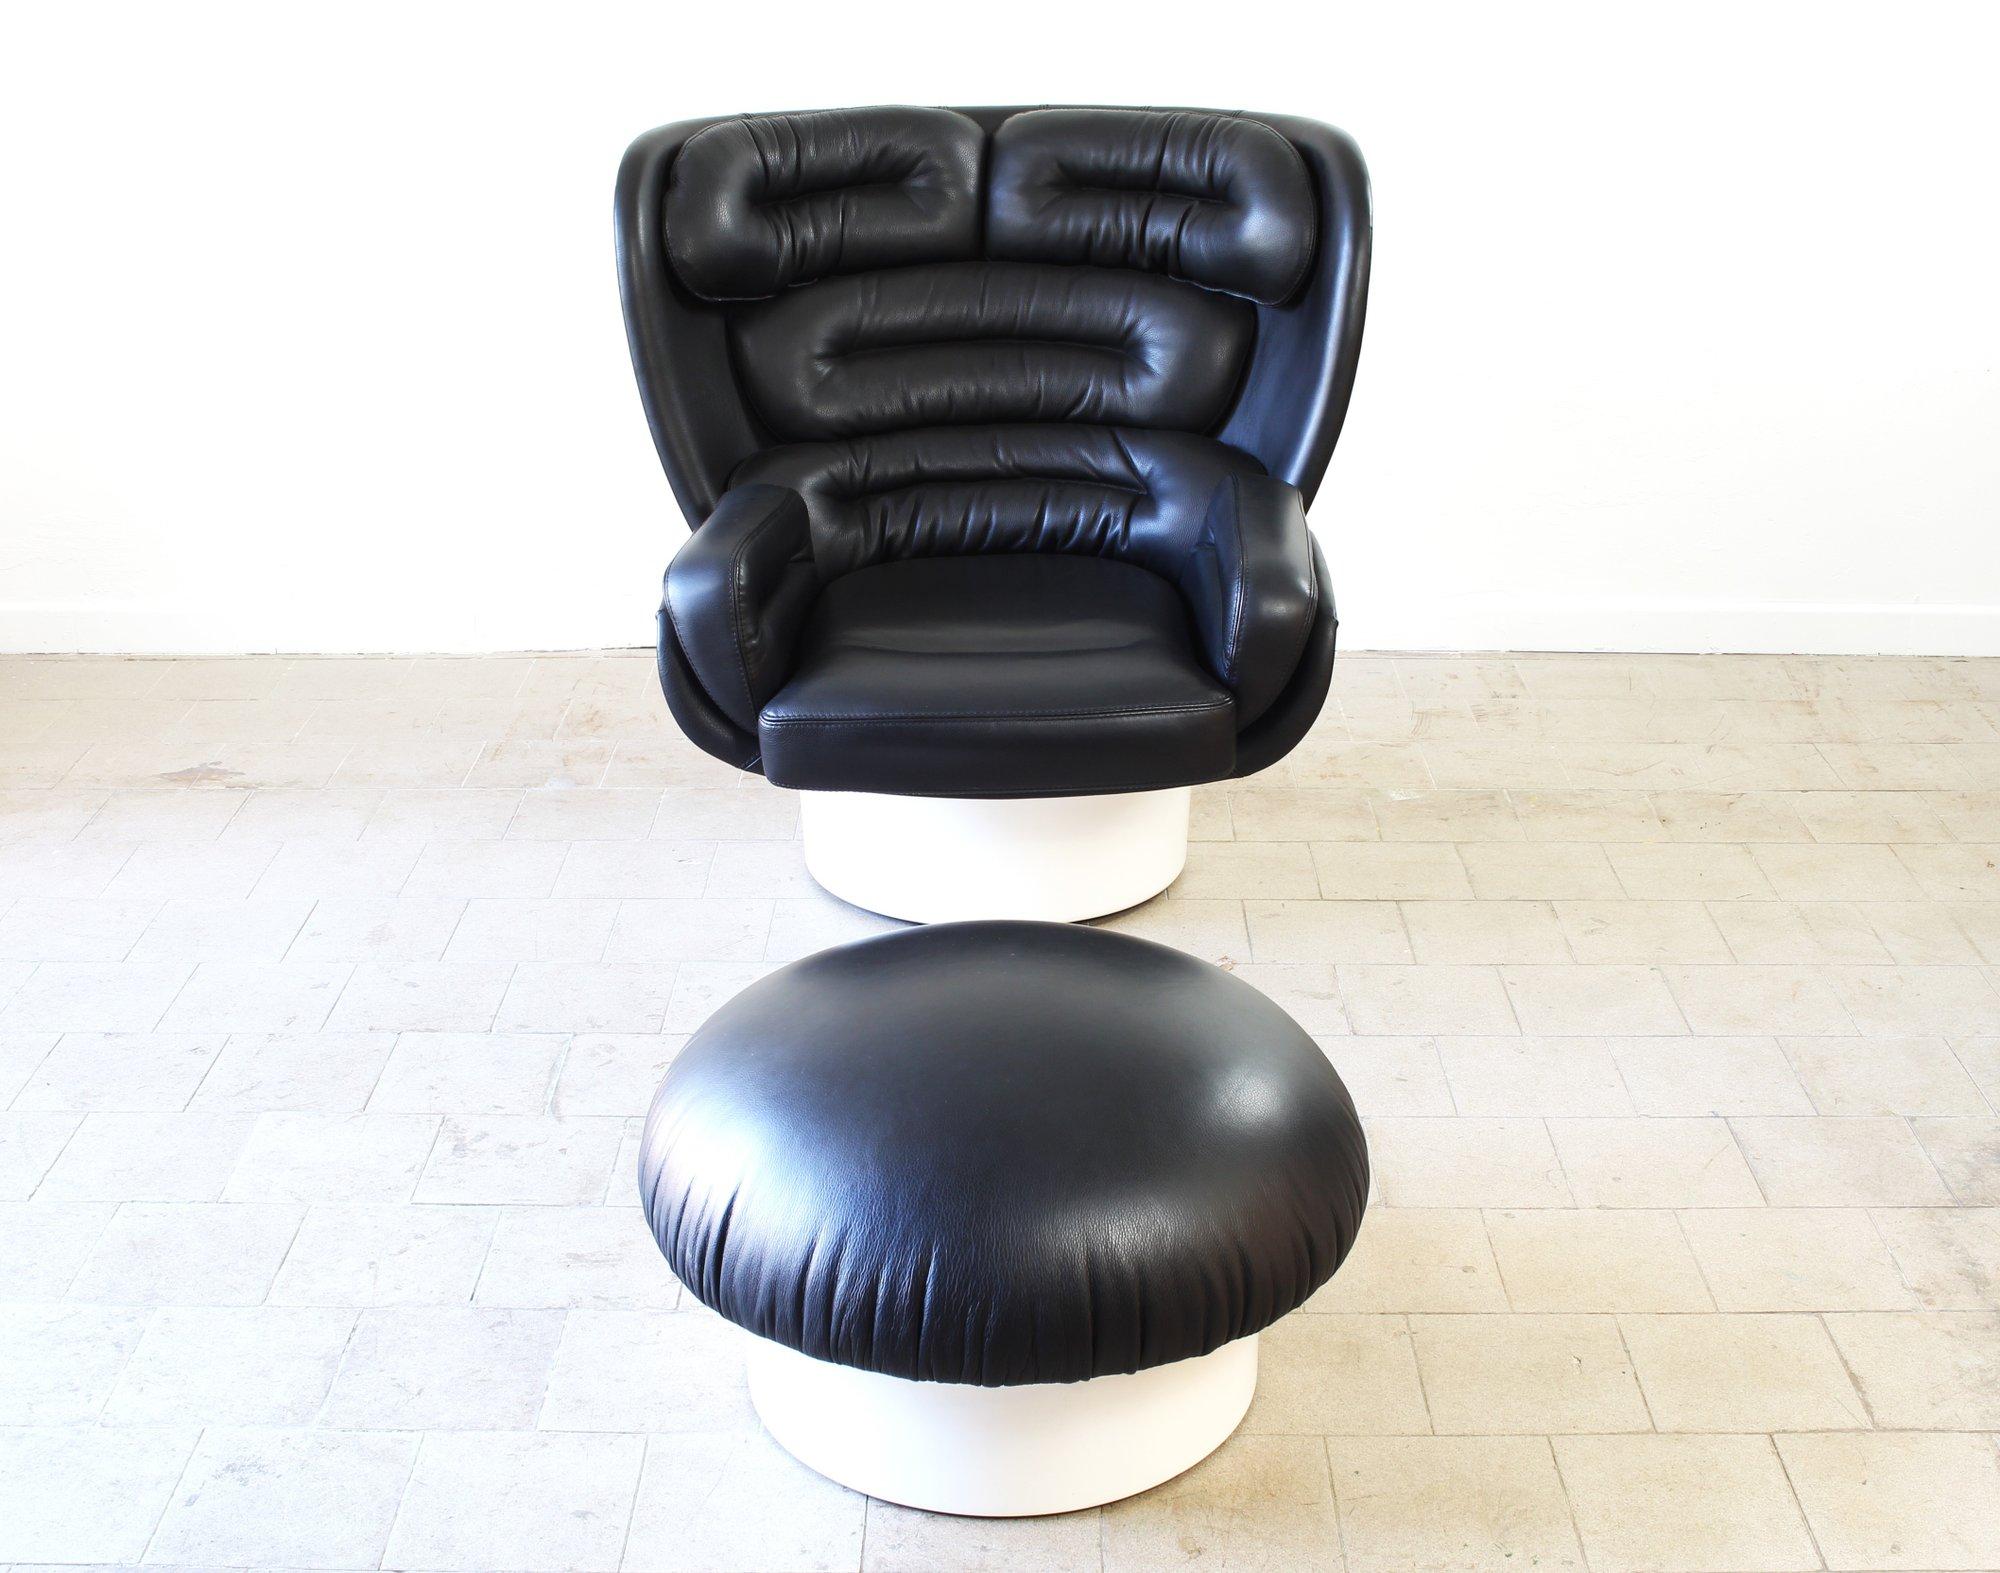 Showroom model in impeccable new condition!
Iconic Space Age classics: Elda Chair by Joe Colombo (1963- Italy) with Ottoman (very rare to find this combination).
360 degree rotatable base (swivel).

With certificate of authenticity and